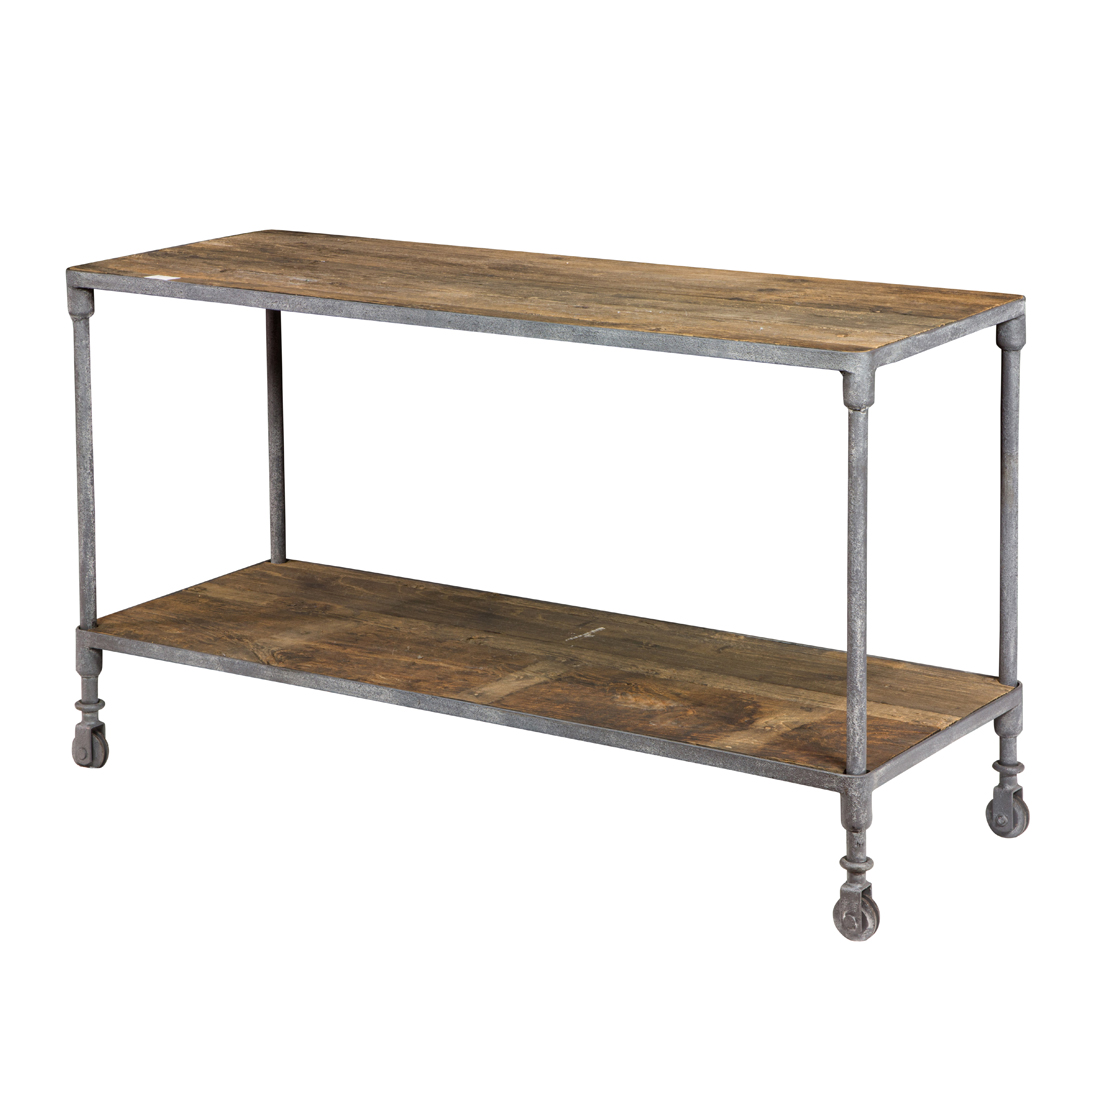 AN INDUSTRIAL STYLE TIERED CONSOLE